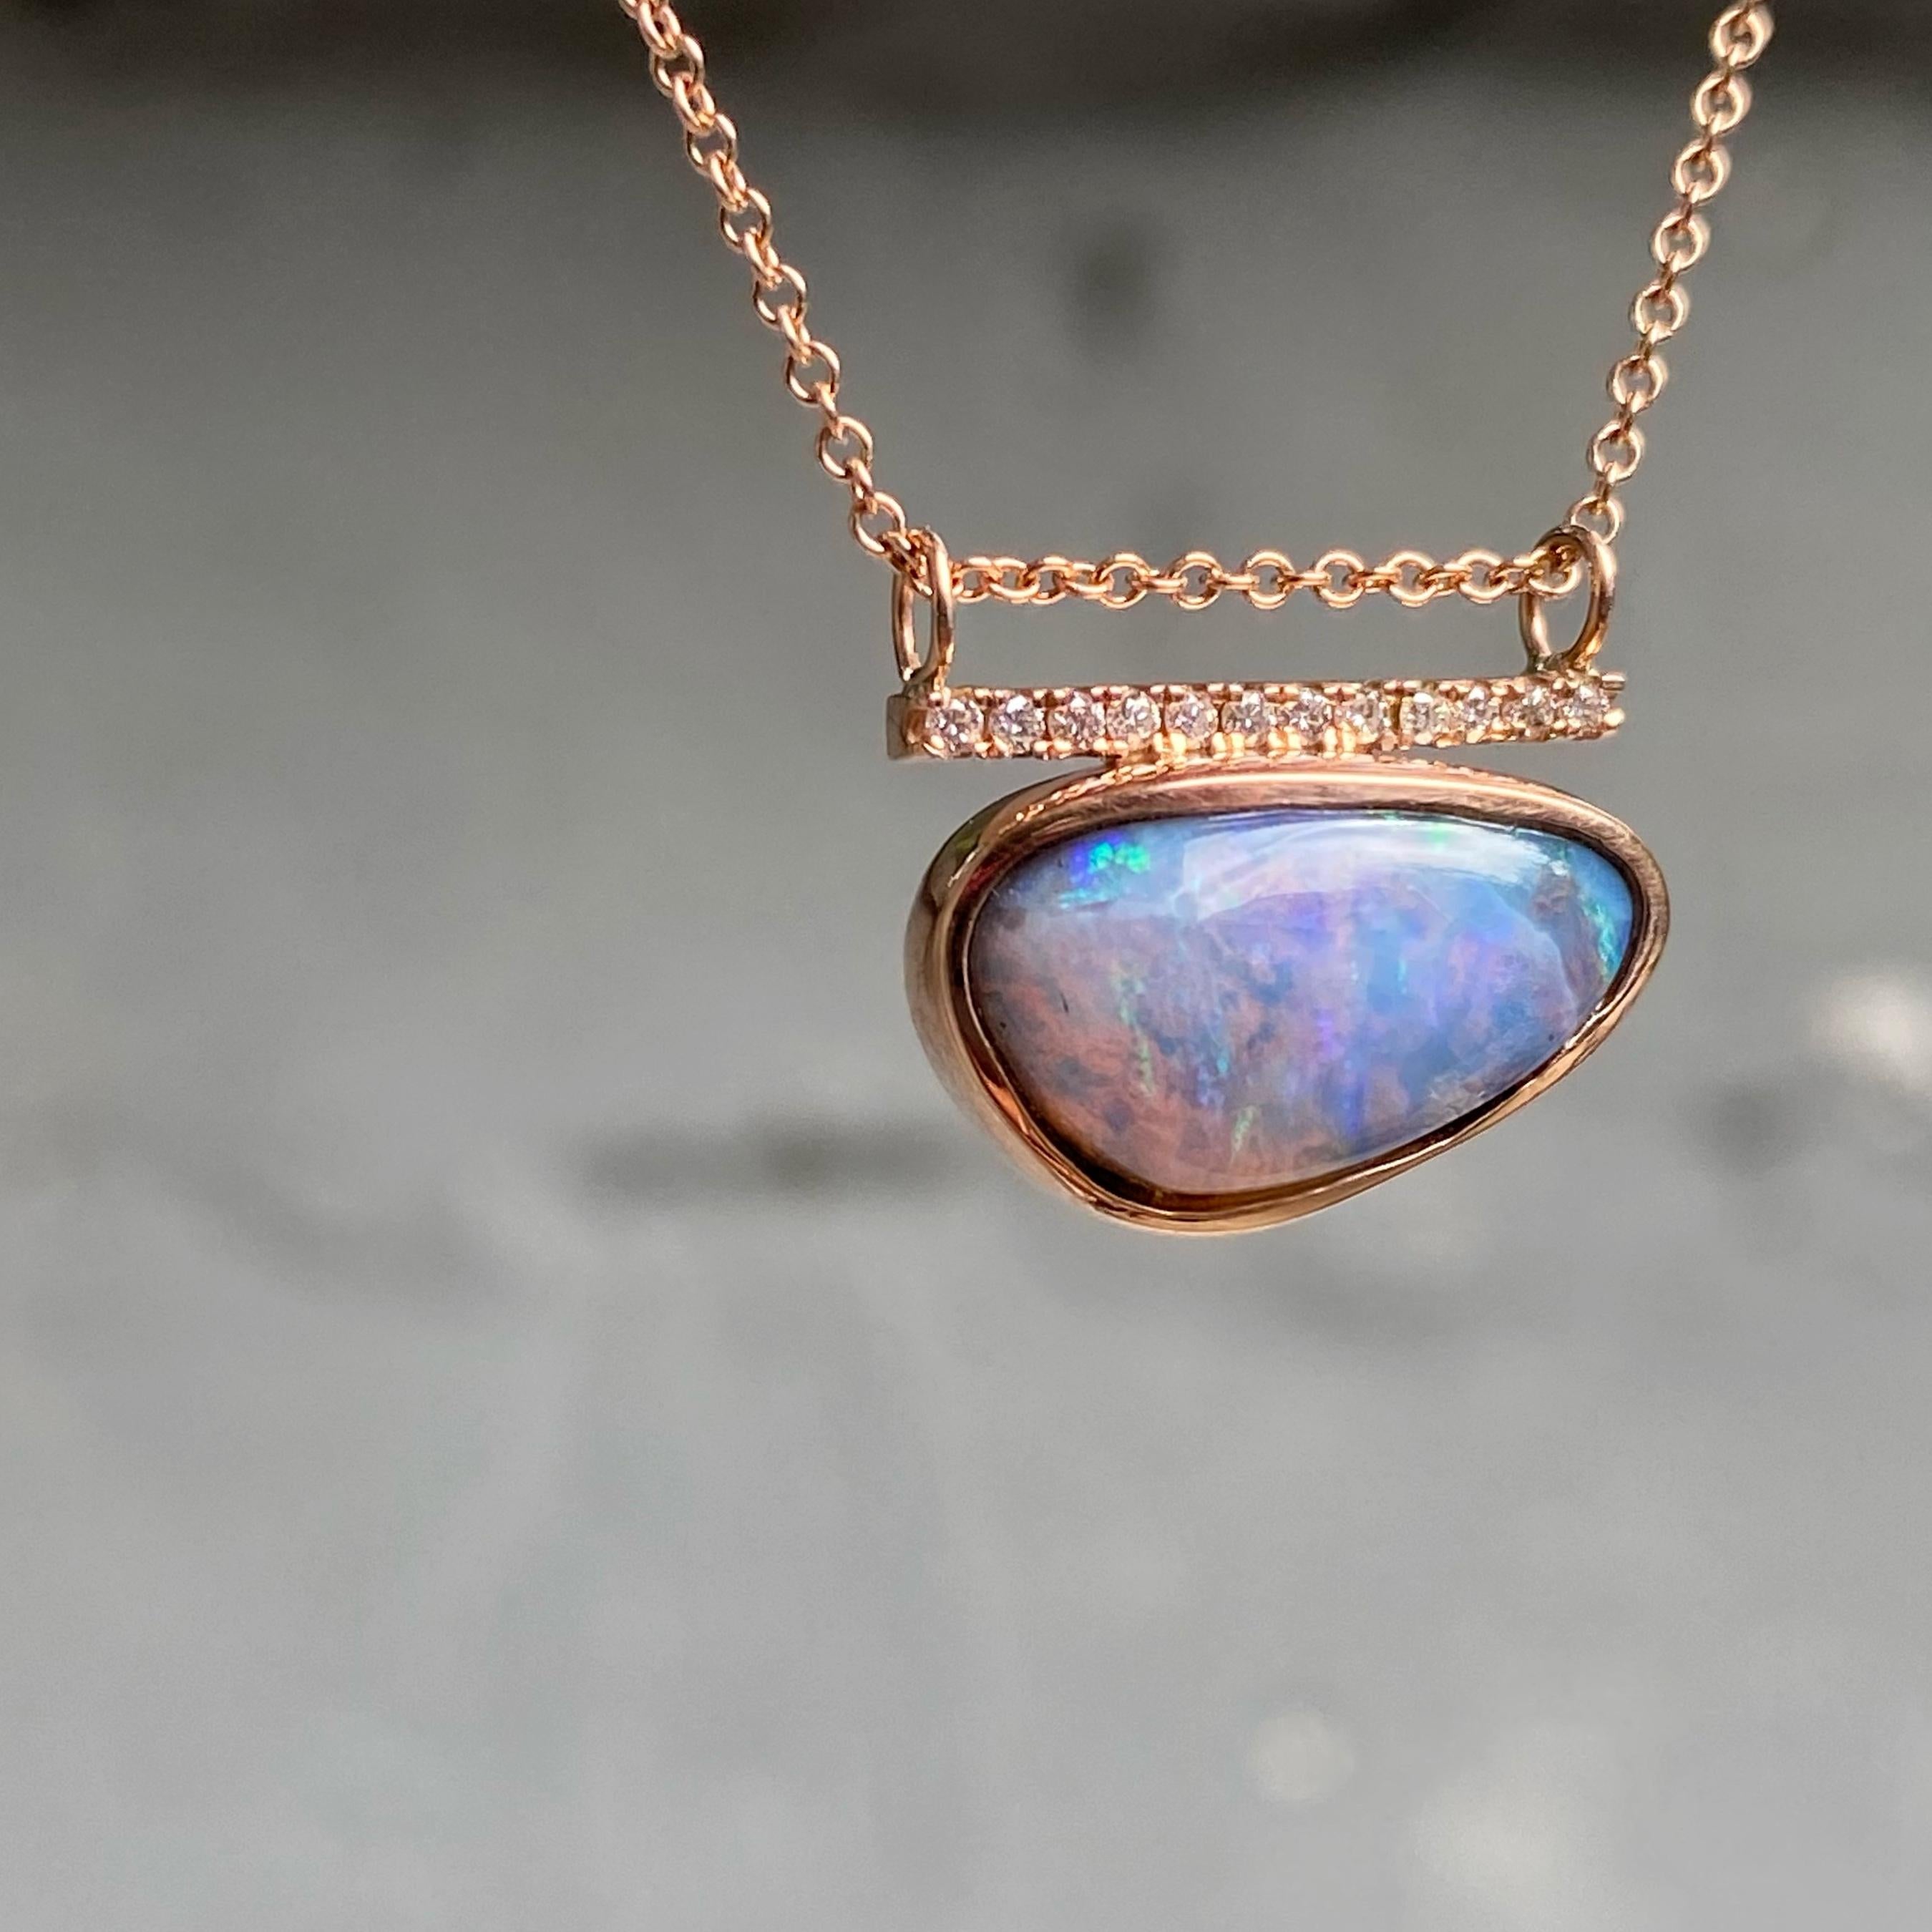 Contemporary Head in the Clouds Rose Gold Opal Necklace No. 15 with Diamonds by NIXIN Jewelry